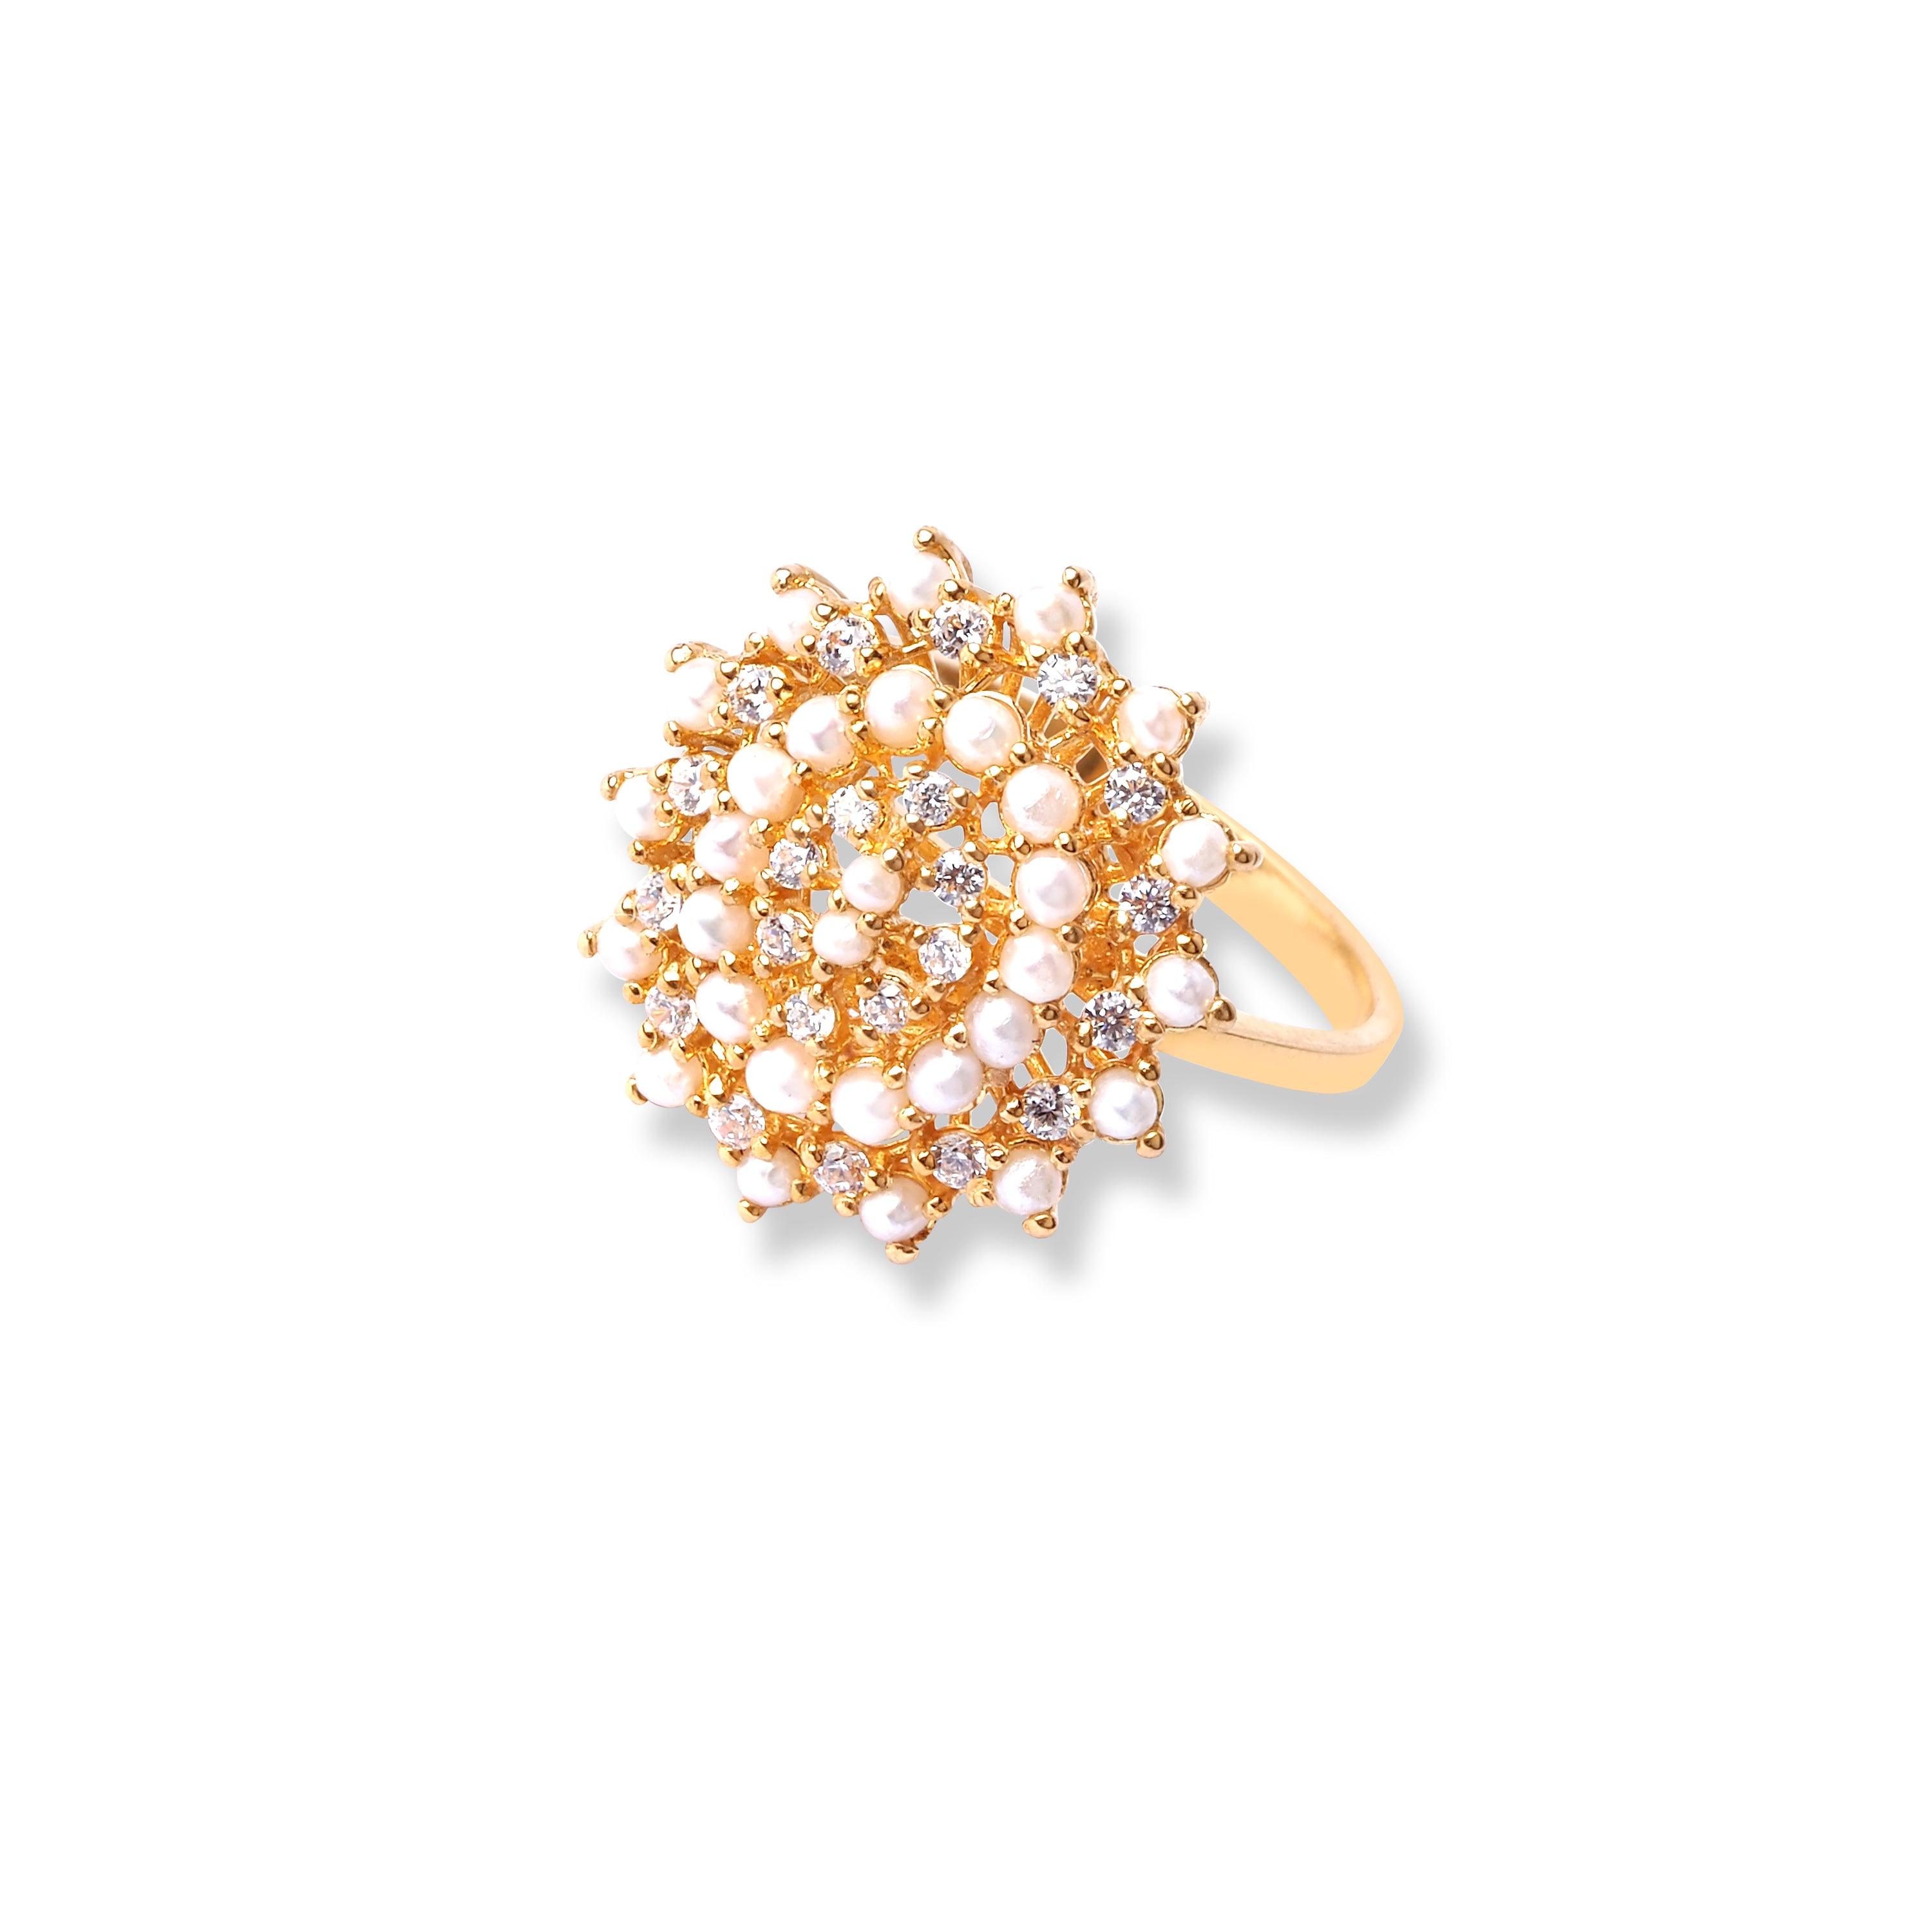 22ct Gold Ring With Cultured Pearl & Cubic Zirconia Stones (4.9g) LR-6593 - Minar Jewellers